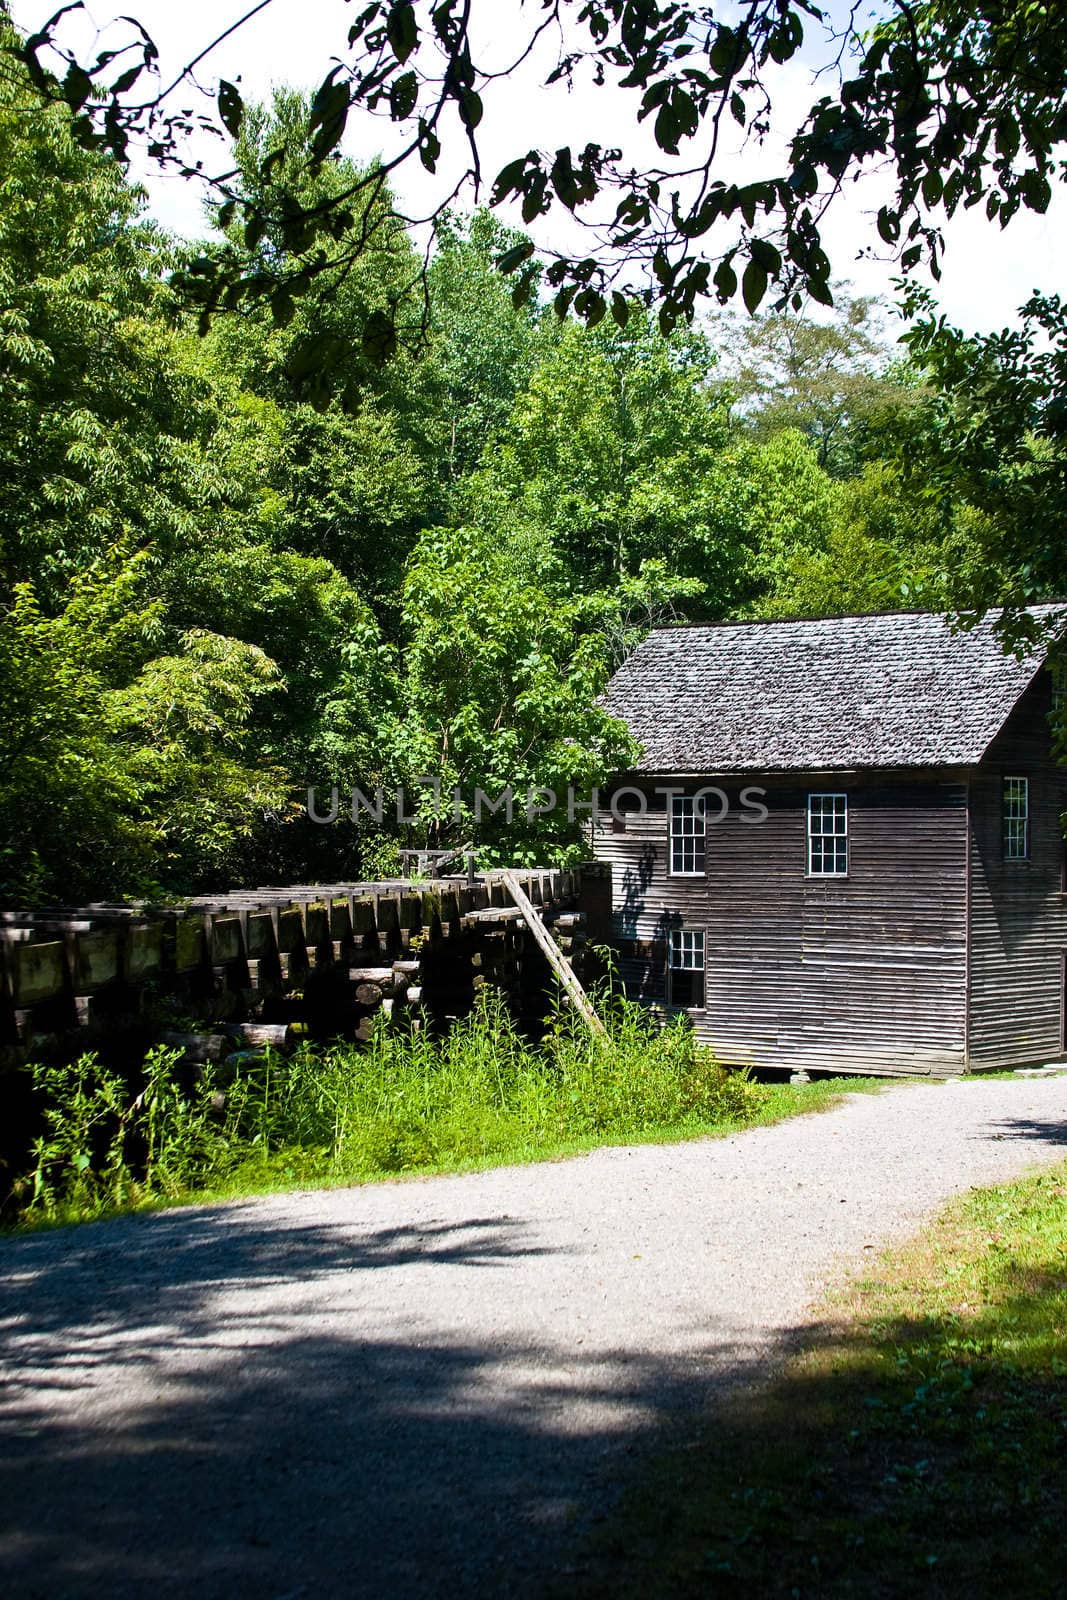 grist mill by snokid